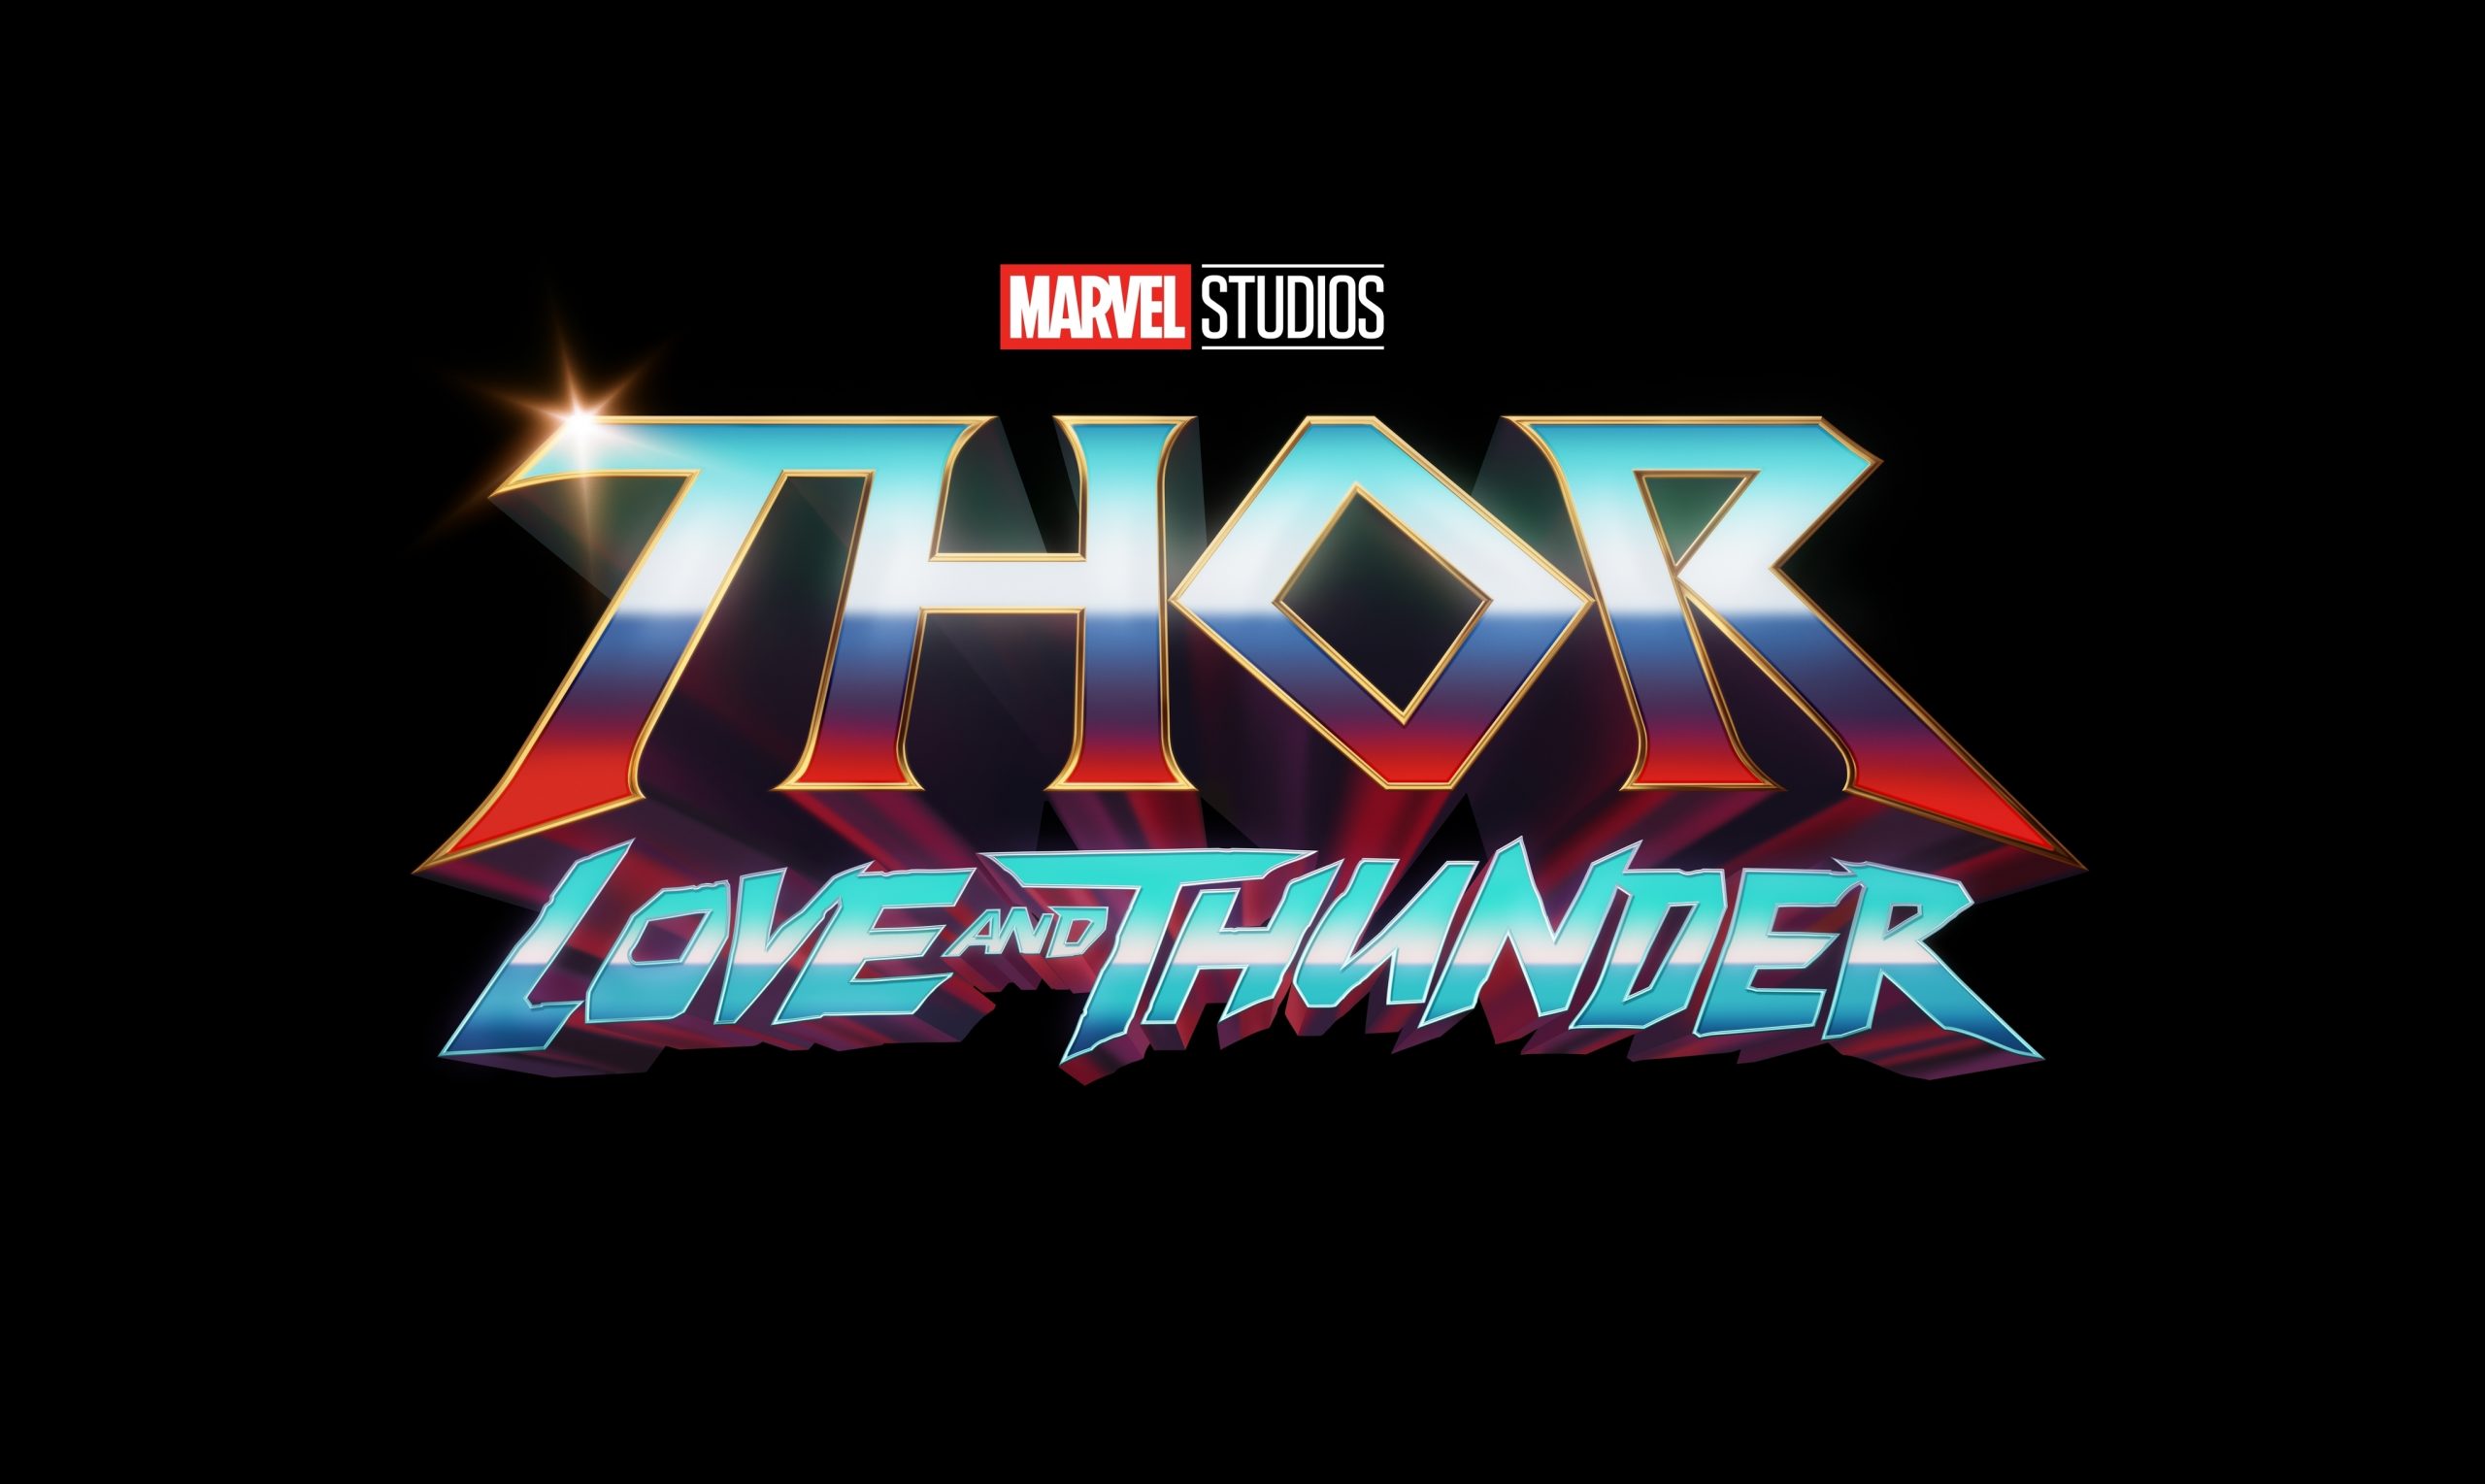 Chris Hemsworth Criticizes Thor: Love and Thunder for Being Too Silly